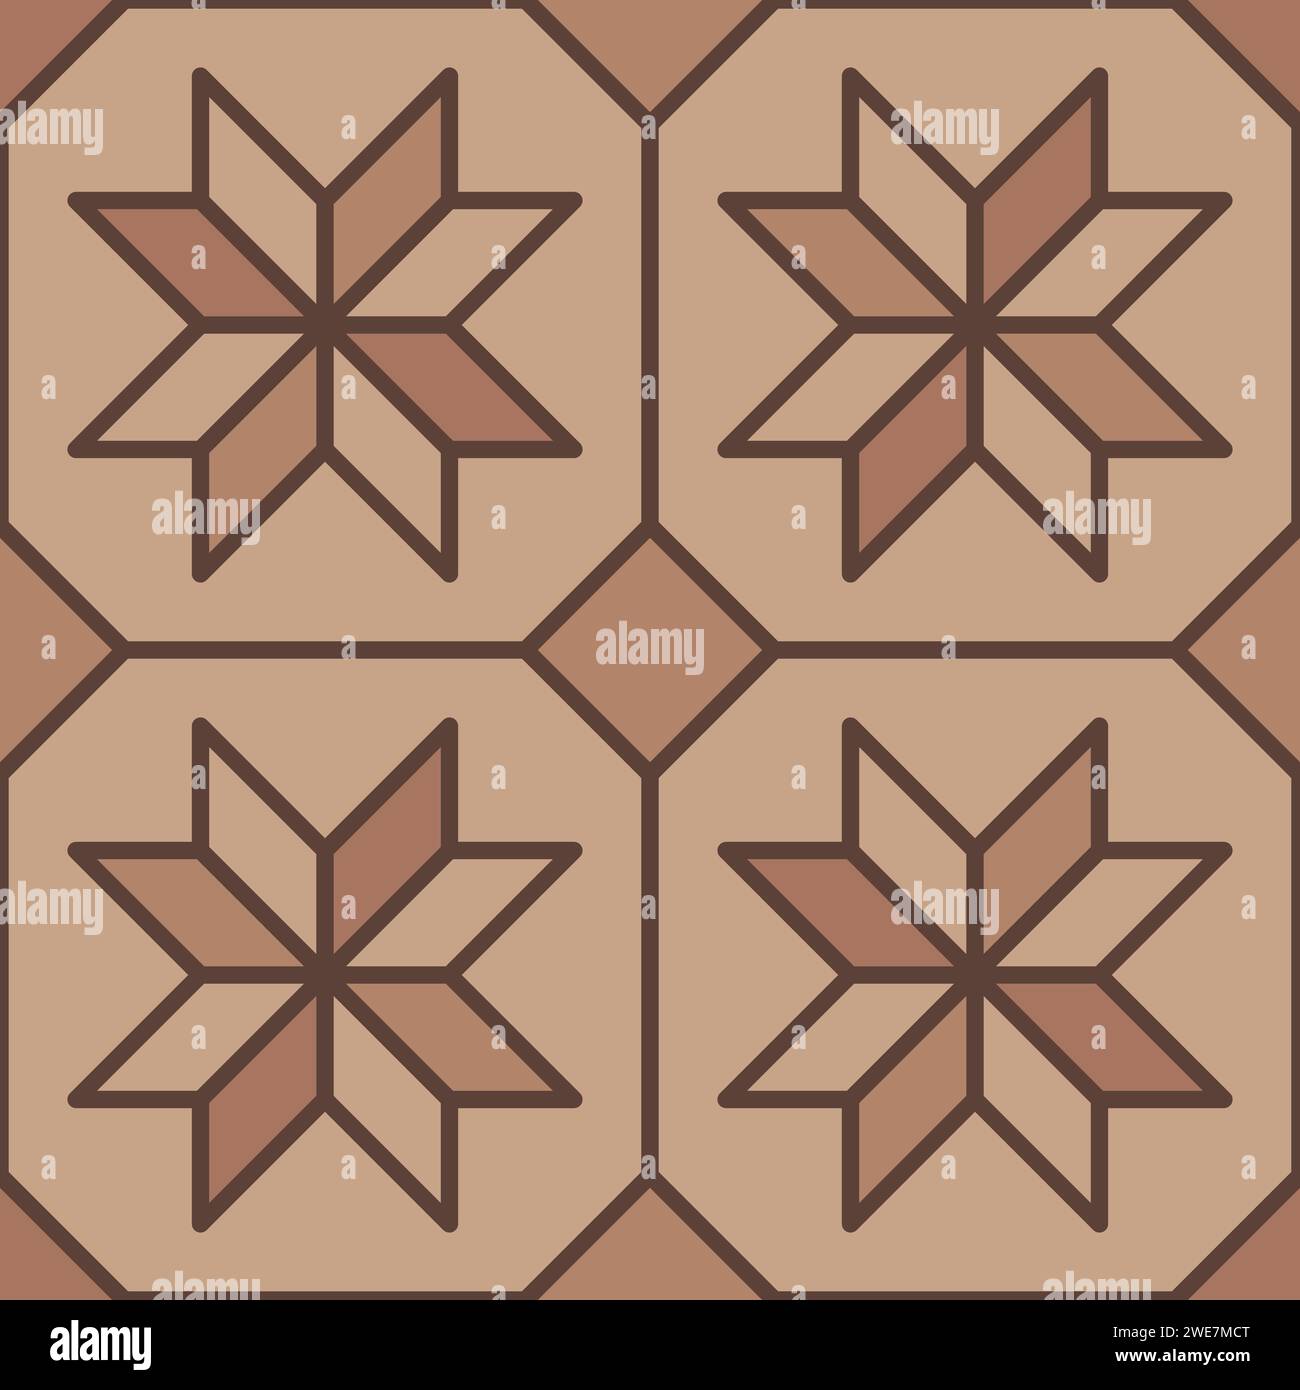 Brown pavement top view pattern, street cobblestone, garden sidewalk tile surface with contrasting hues. Vector laminate flooring, alley path, ground layout with decorative stars or flowers inlay Stock Vector